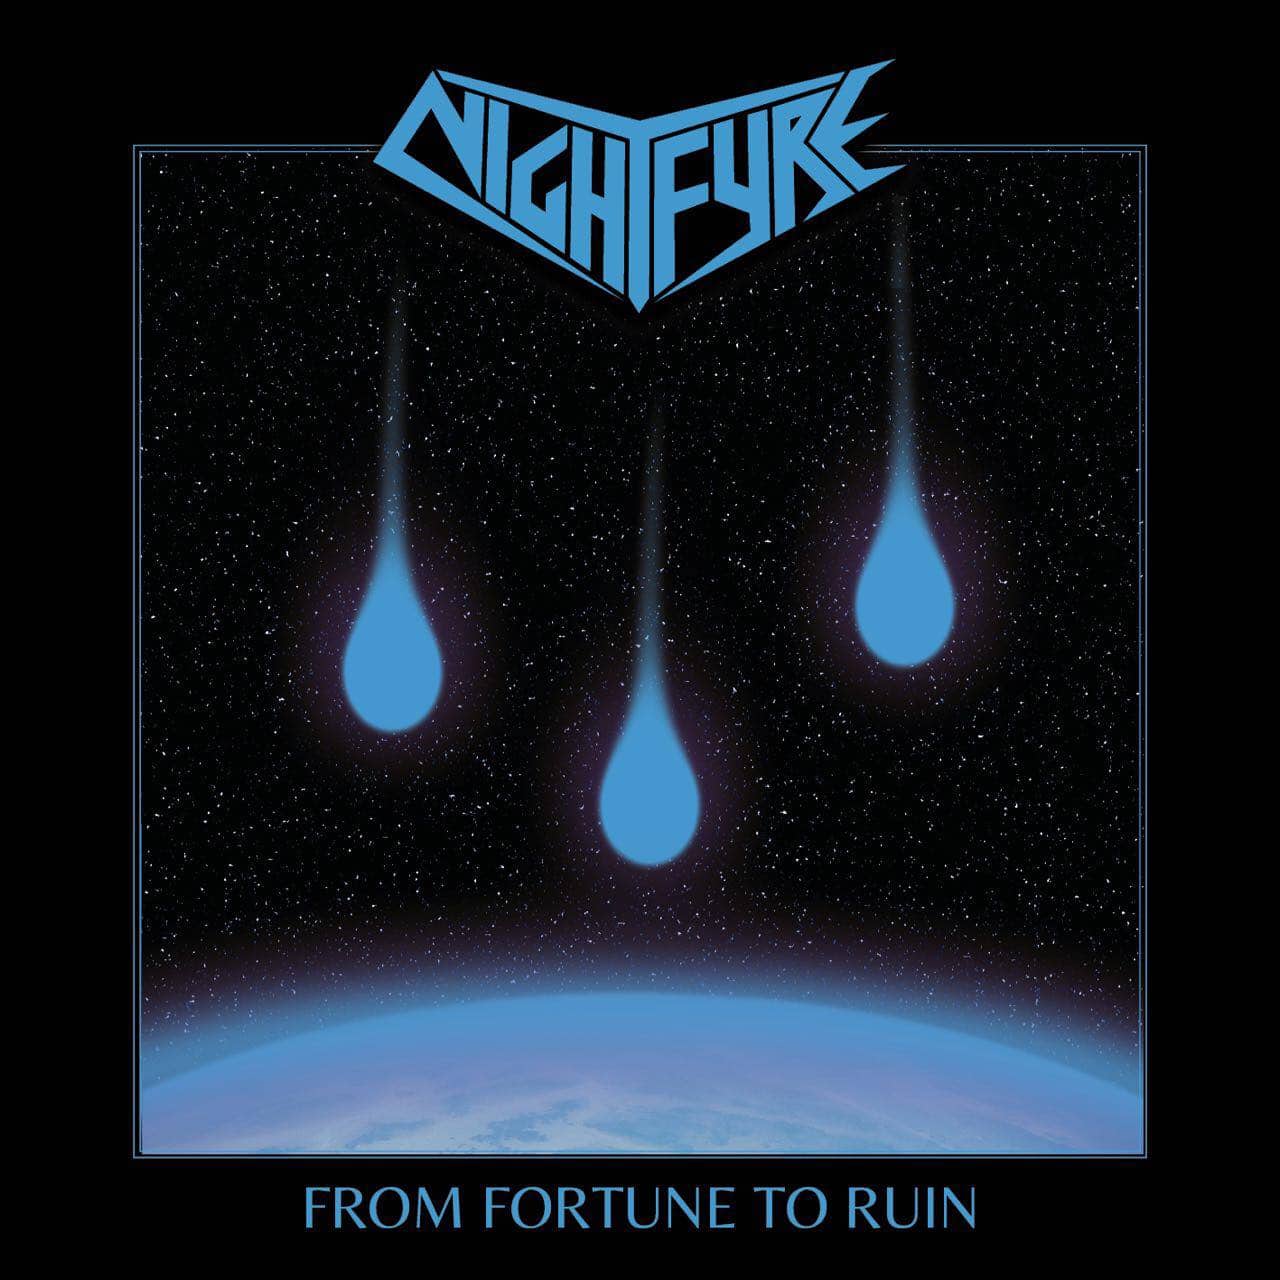 Nightfyre - From Fortune to Ruin LP/CD/digital Pressing Info: 100 clear blue (mailorder exclusive), 400 black 500 CDs